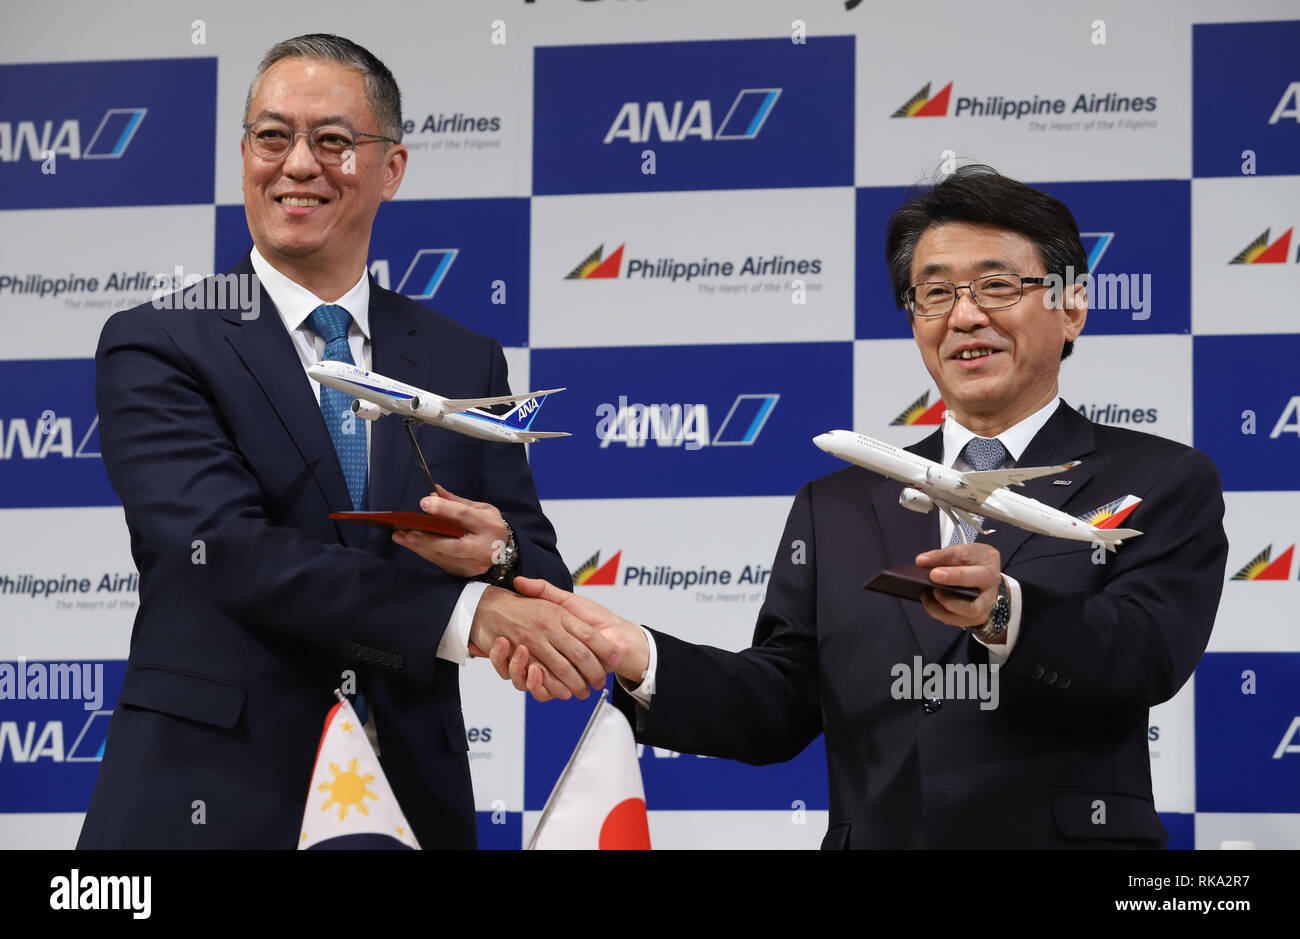 Tokyo, Japan. 8th Feb, 2019. LT Group president and PAL Holdings director Michael Tan (L) shakes hands with ANA Holdings president Shinya Katanozaka as they announce the companies expand their partnerships in Tokyo on Friday, February 8, 2019. ANA Holdings will invest 95 million U.S. dollars to PAL Holdings and acquire 9.5 percent of PAL Holdings shares. Credit: Yoshio Tsunoda/AFLO/Alamy Live News Stock Photo